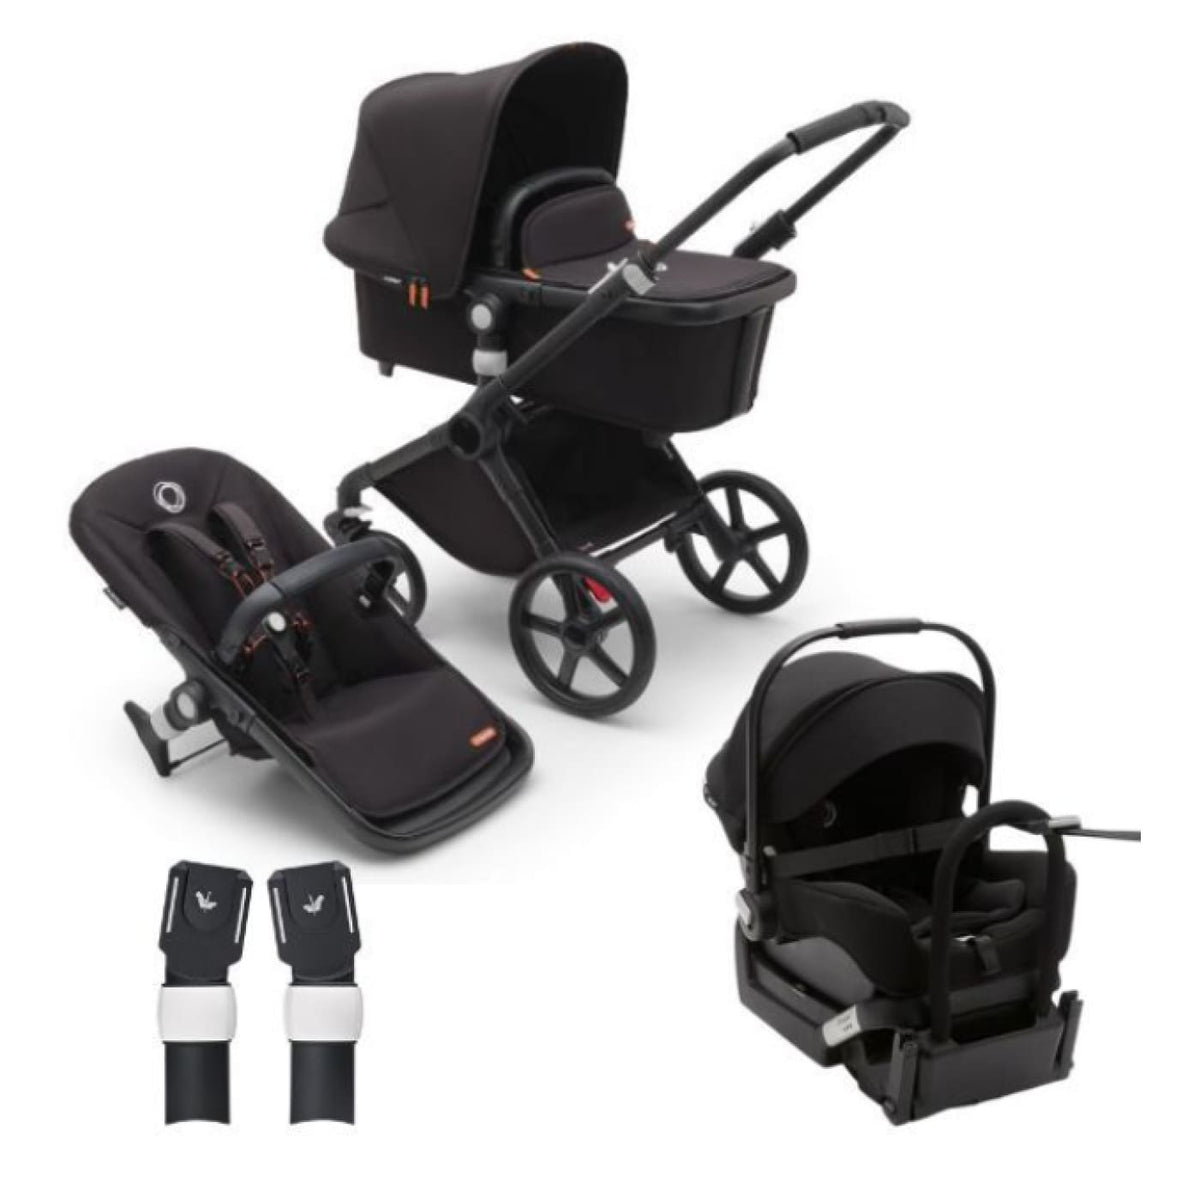 BUGABOO Fox Cub Pram Complete TRAVEL SYSTEM BUNDLE - Black/Midnight Black-Midnight Black - PRAMS &amp; STROLLERS - PACKAGES